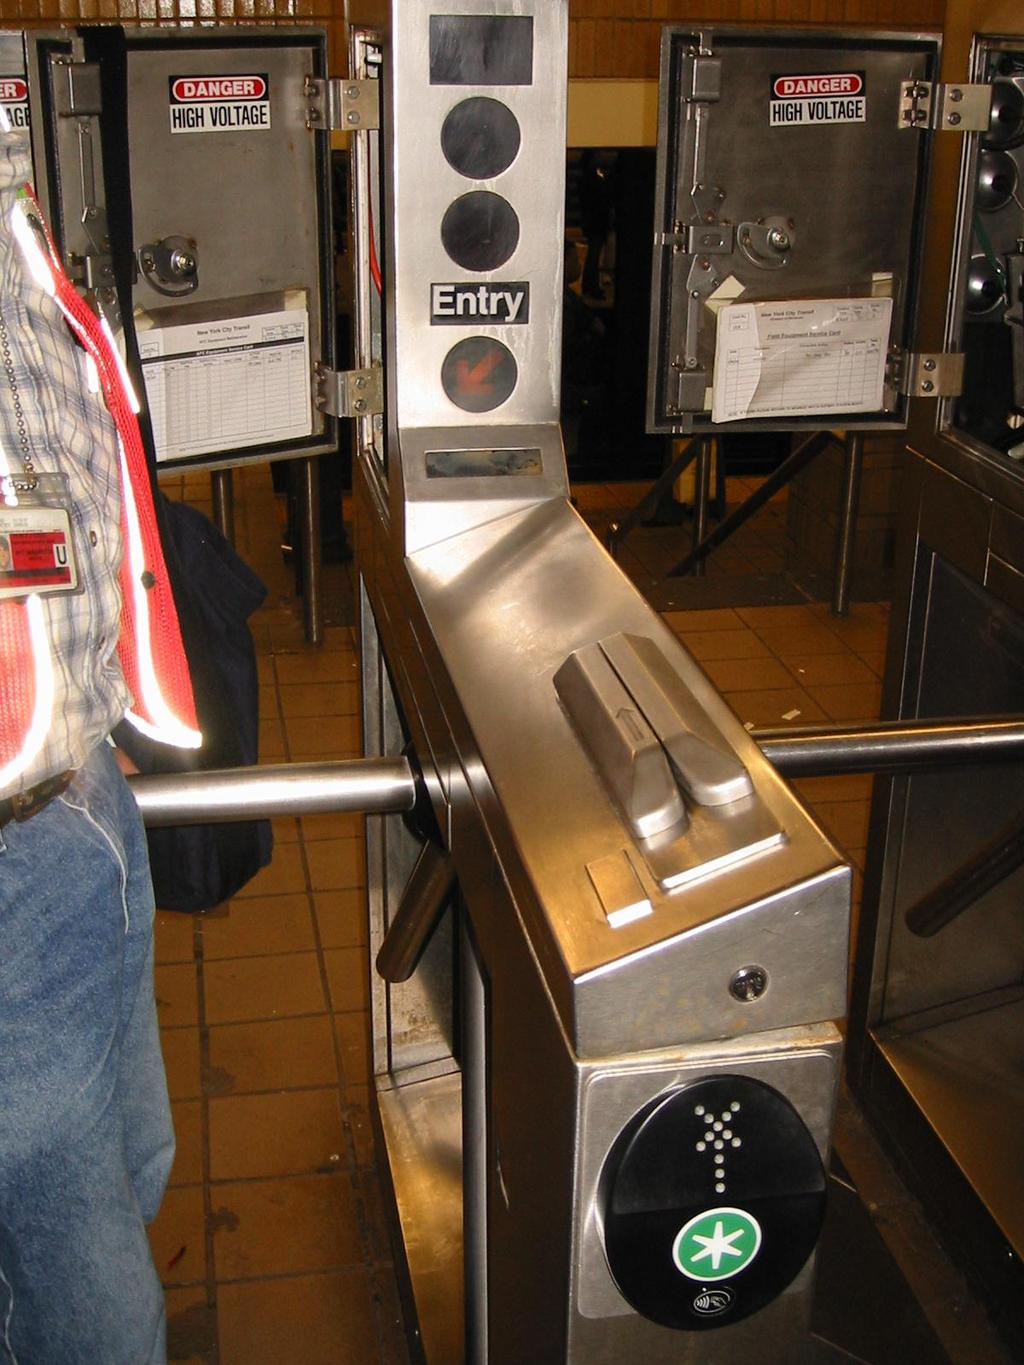 New York Mass Transit Authority Terminal/Reader Installation 4 Removed coin slots